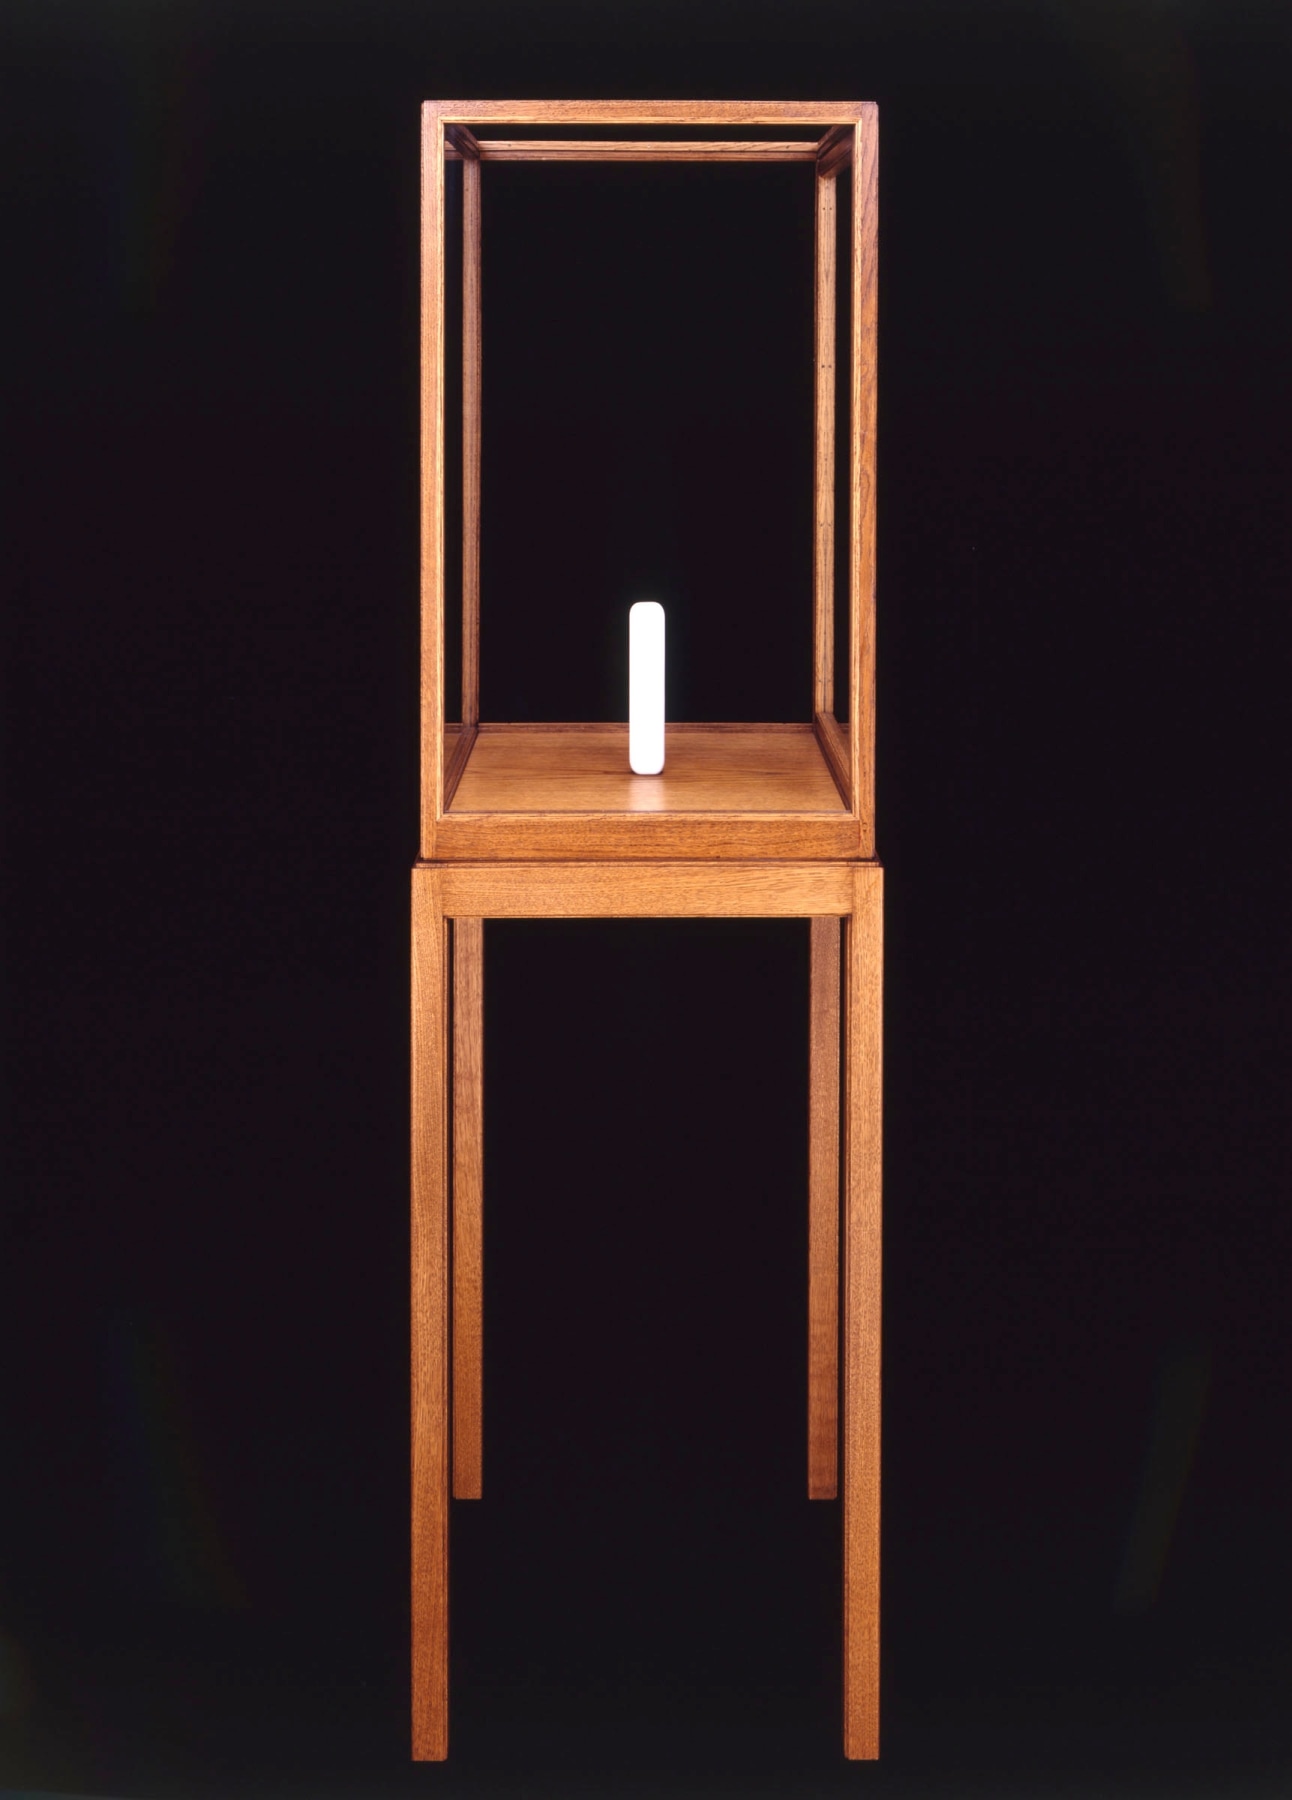 James Lee Byars

&amp;ldquo;The Figure of Question&amp;rdquo;, 1989

Marble

7 3/4 x 1 1/2 x 1 1/2 inches

20 x 4 x 4 cm

JB 105/B

$175,000